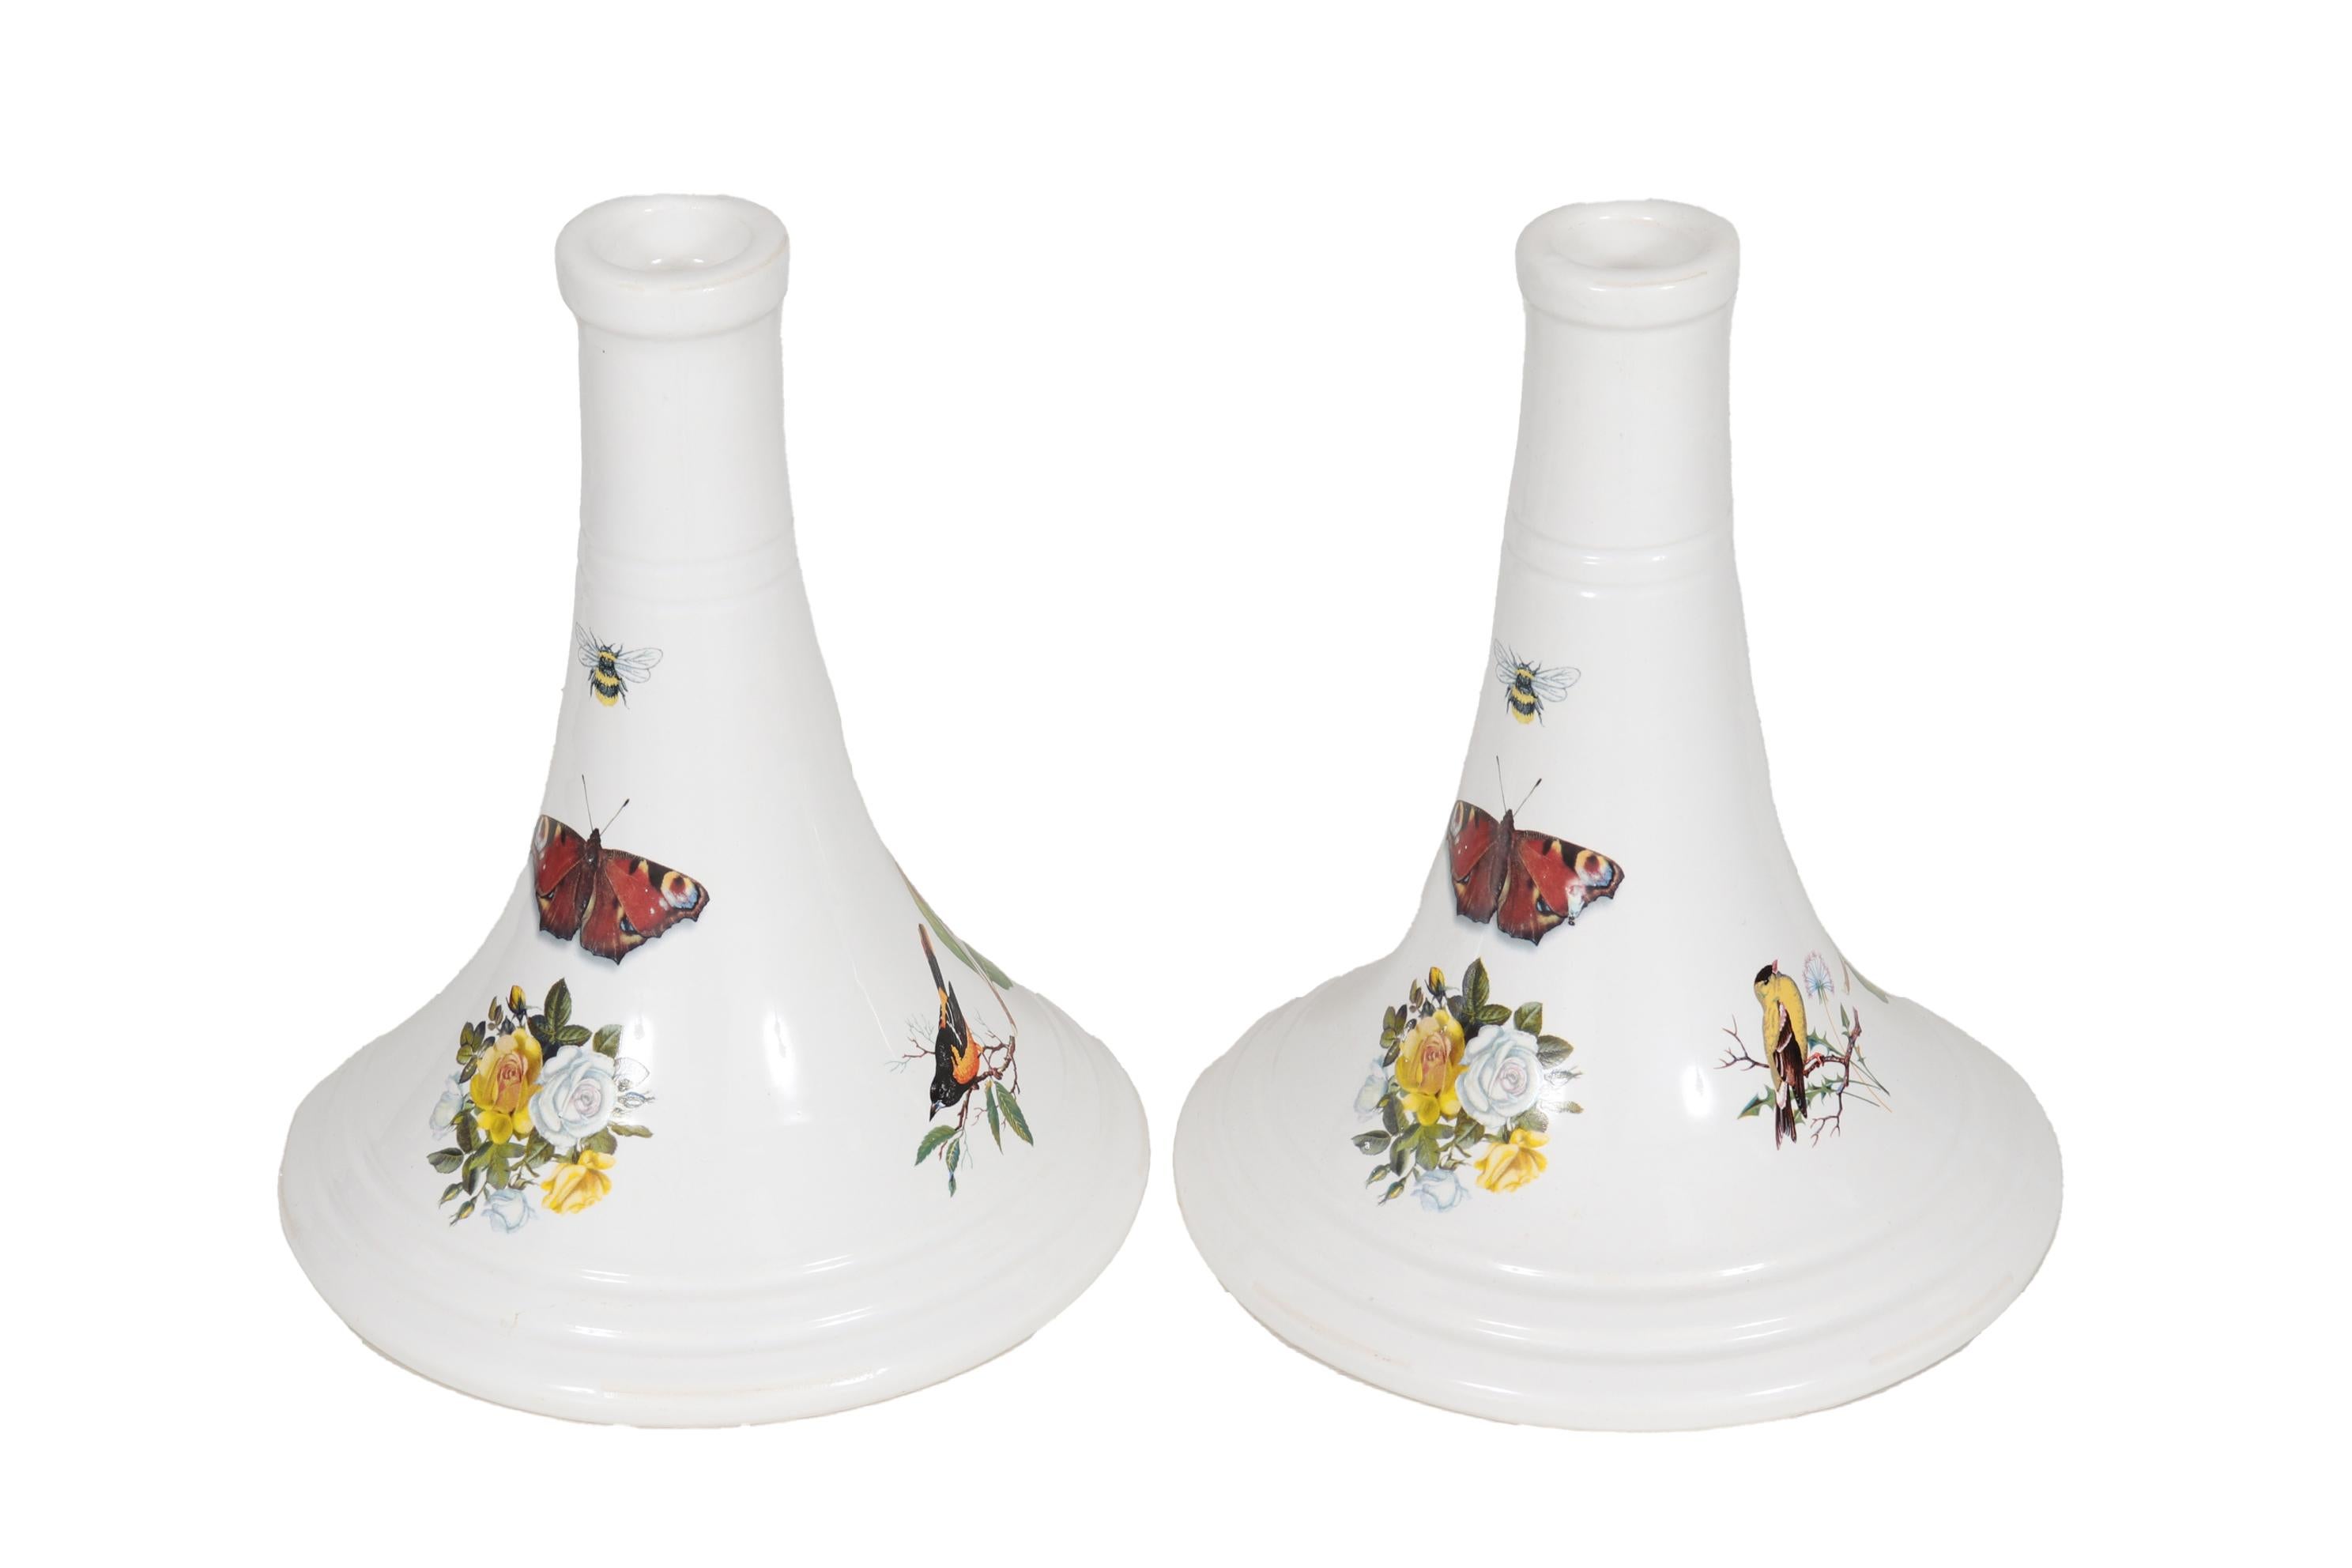 A pair of Italian ceramic candlestick holders. White conical shaped holders are decorated with transferware patterns including white and yellow roses and honeysuckle, orange and yellow orioles, monarch butterflies and bees. Dimensions per candle